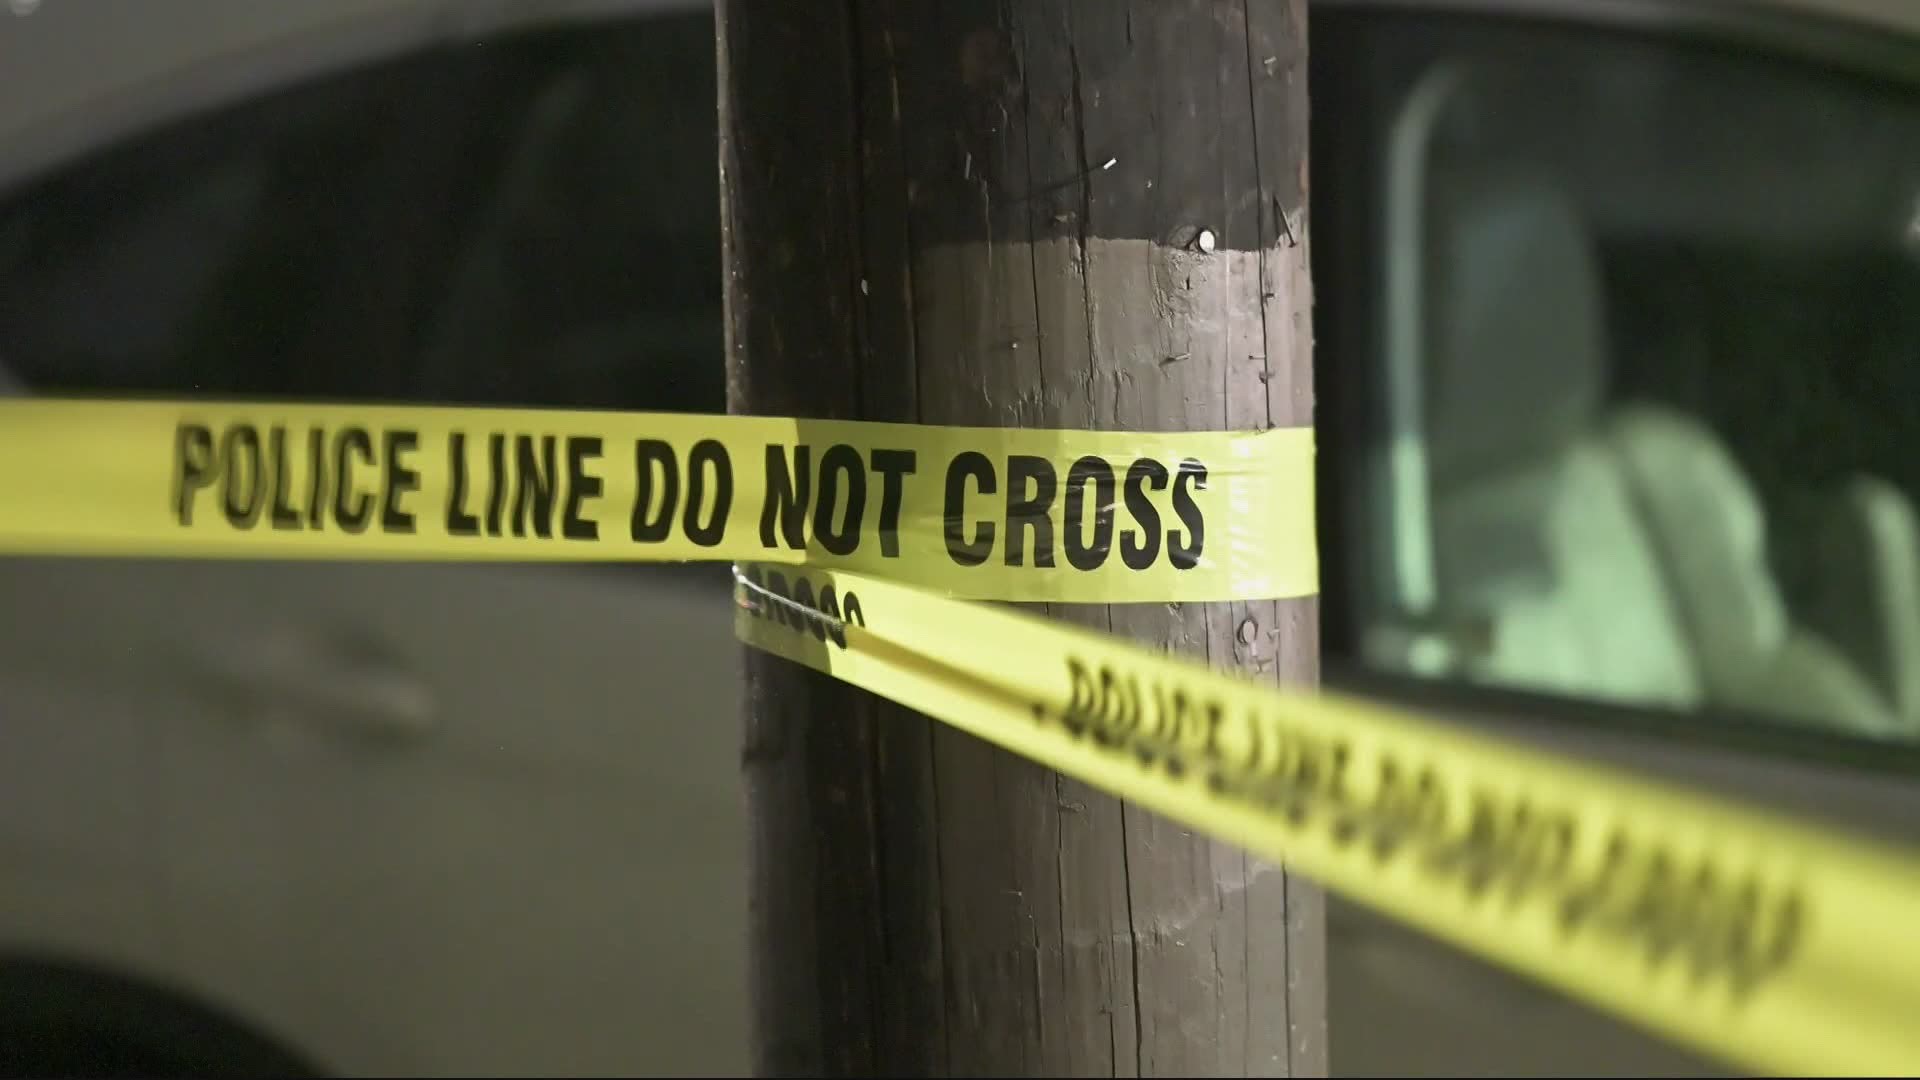 Four people were shot and killed at a home in Southeast Portland. Police have released few details but do not believe it was a murder-suicide.